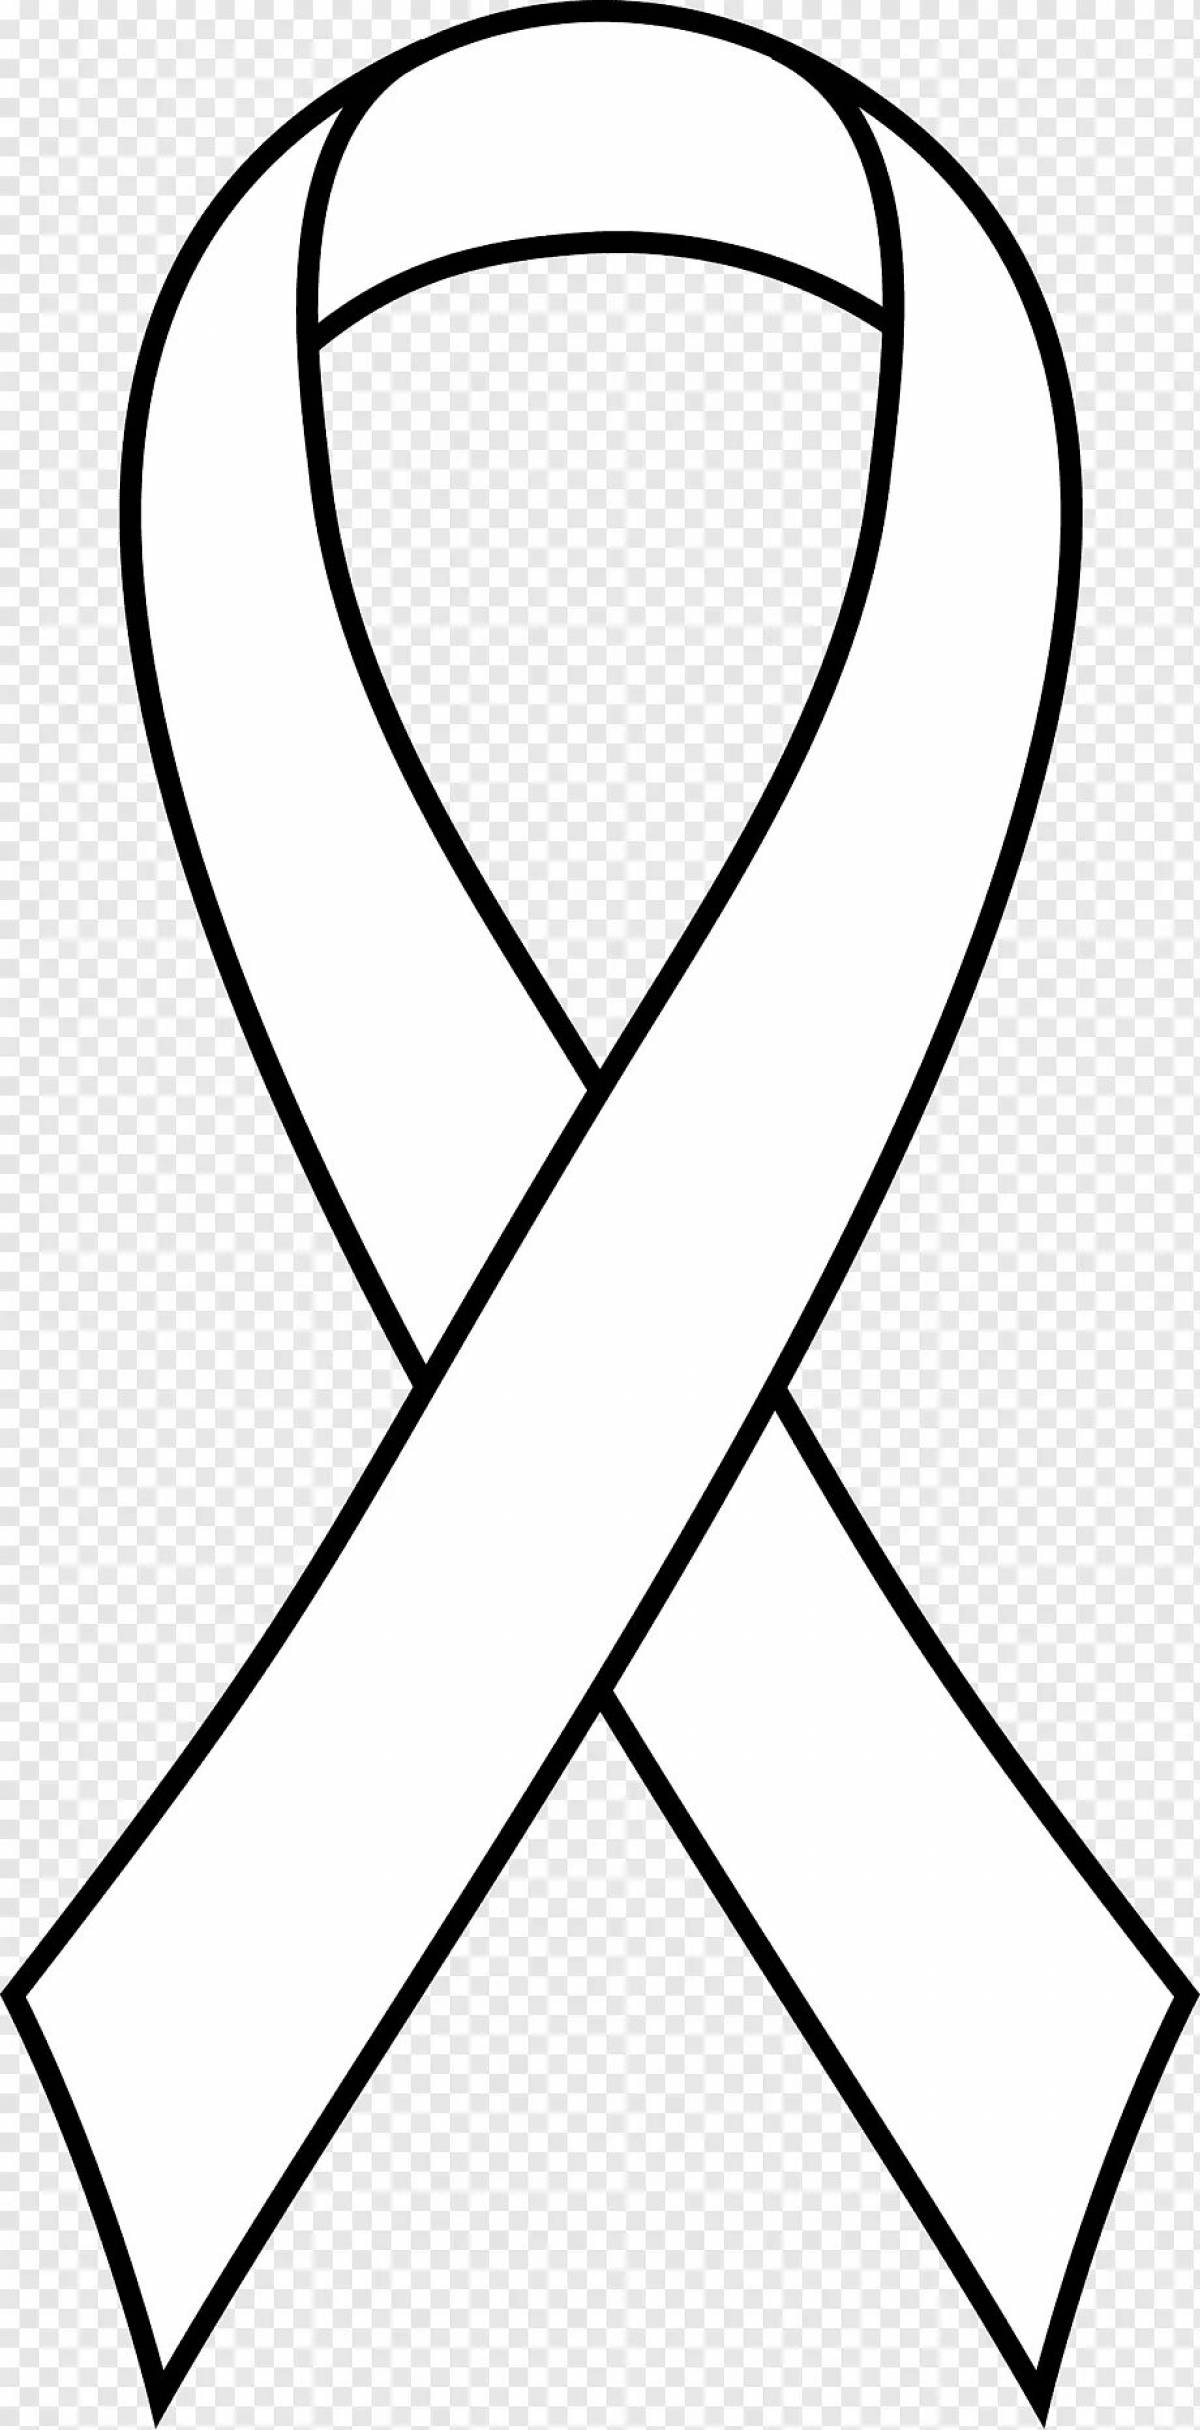 Coloring page with tied ribbon